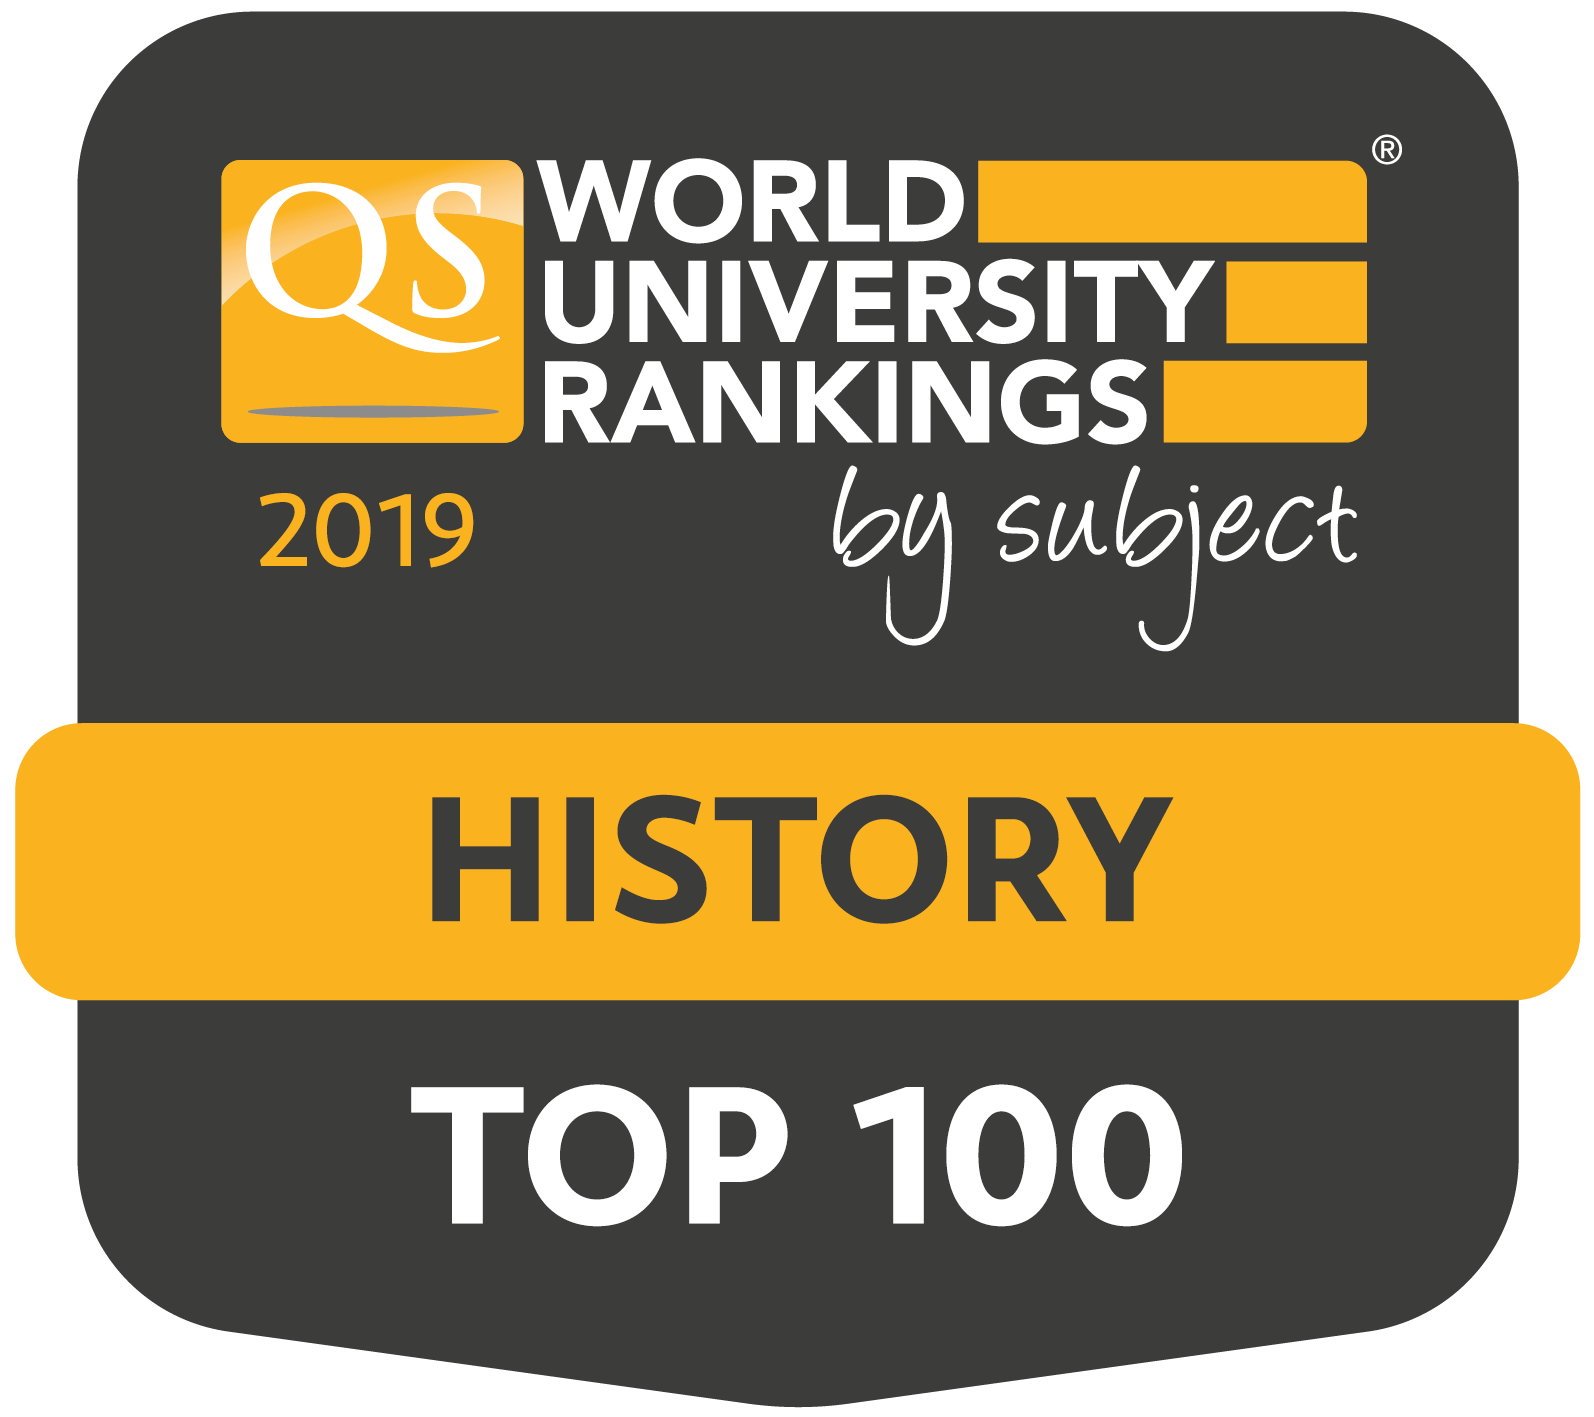 QS by subject. QS by subject rankings” logo. World University rankings by subject. QS World rankings logo. Qs world university